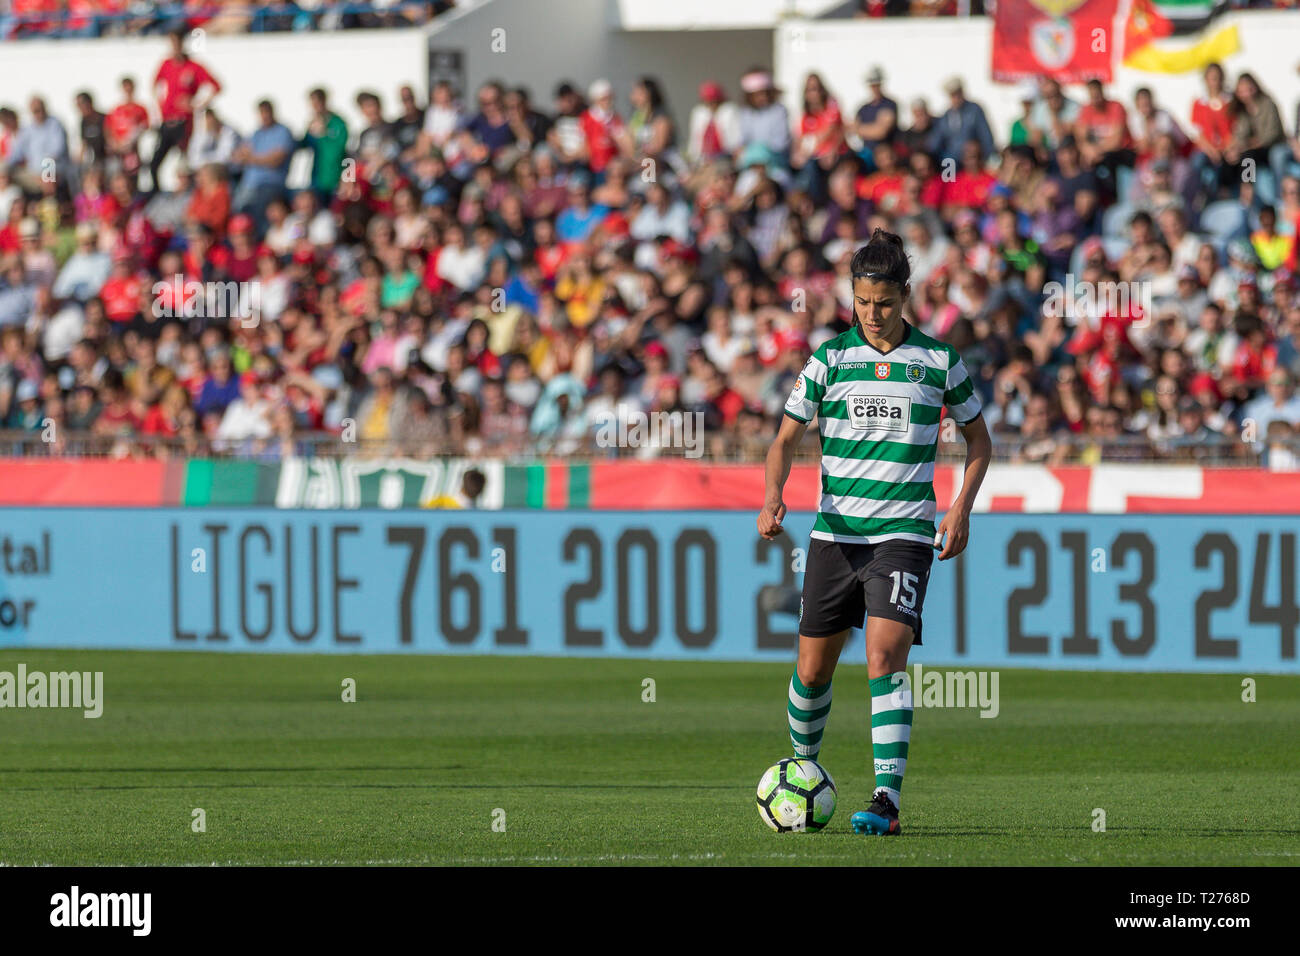 Lisbon, Portugal. 30th March 2019. Sporting's defender from Portugal Carole Costa (15) in action during the game of the Vicente Lucas Trophy between SL Benfica vs Sporting CP © Alexandre de Sousa/Alamy Live News Stock Photo